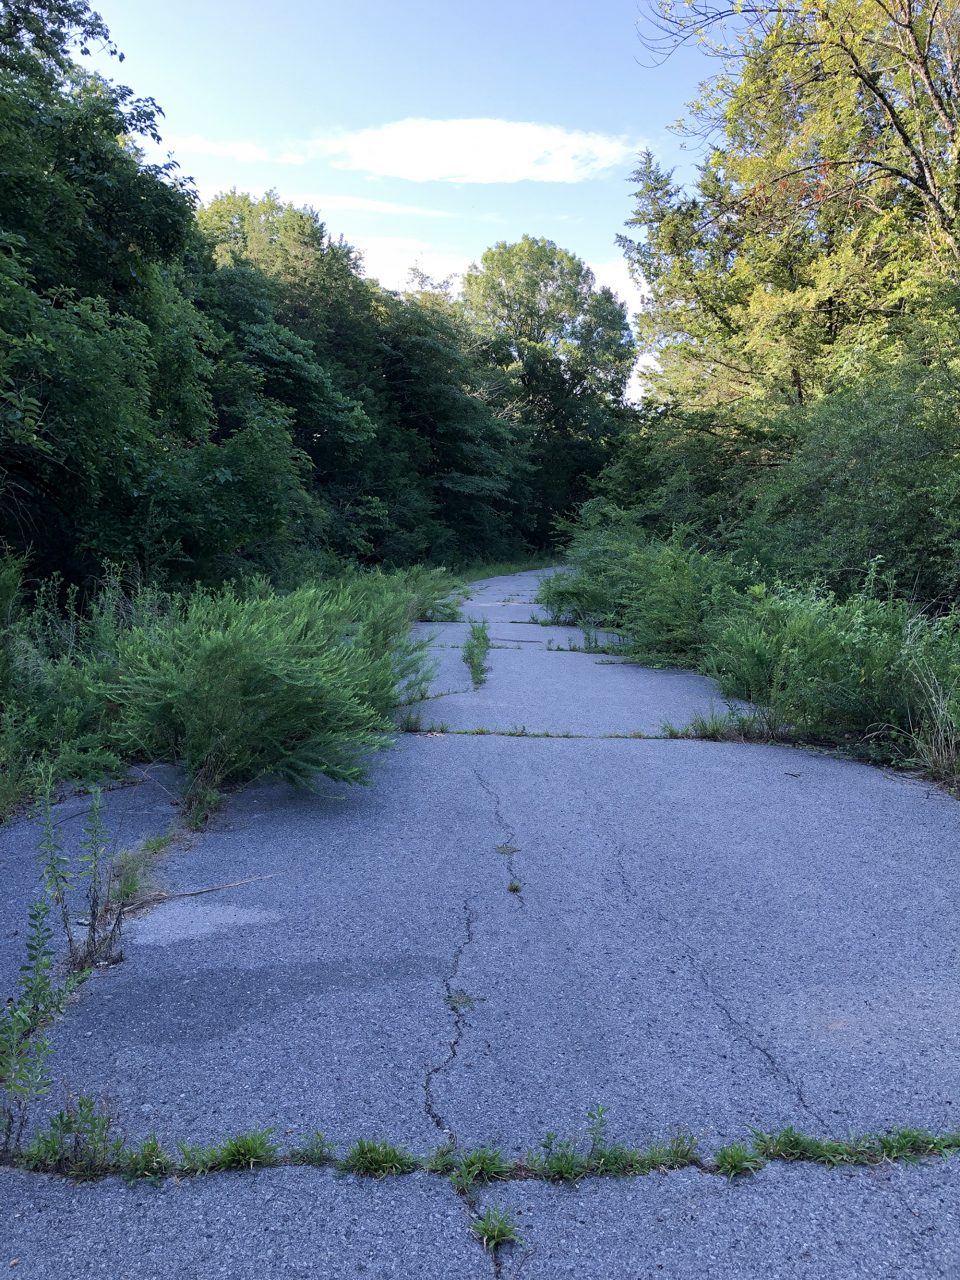 Part of the abandoned road that leads to Old Jefferson. To help beat the summer heat, I got a very early start.